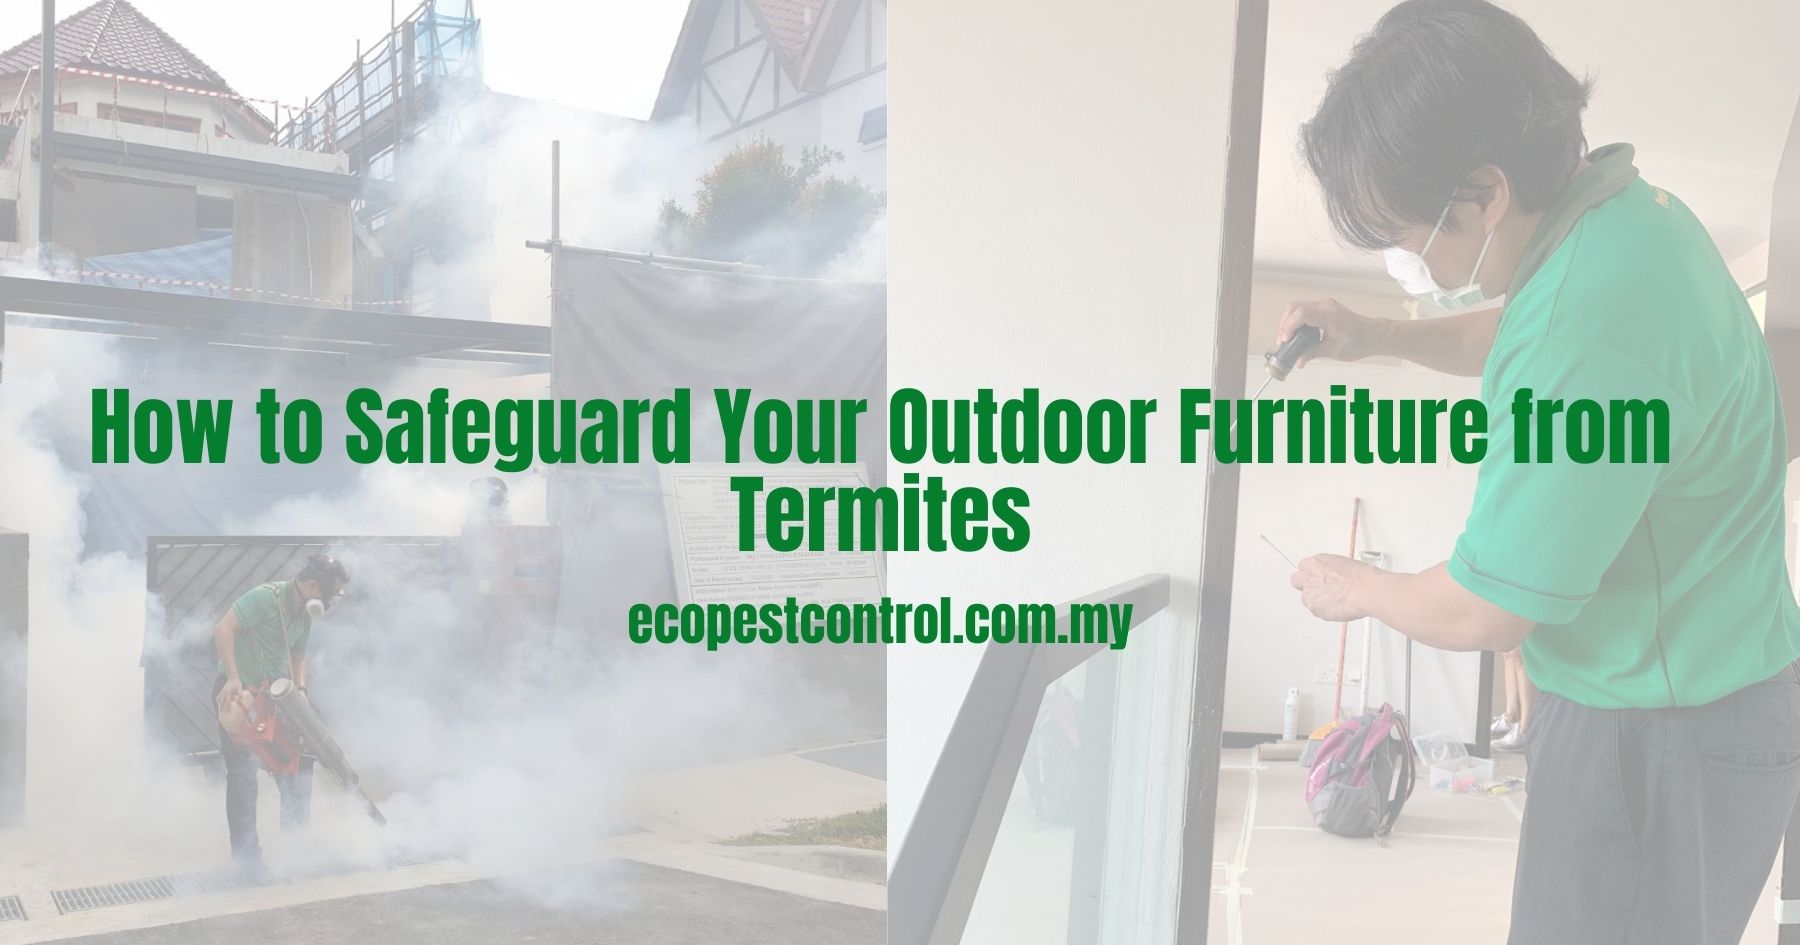 How to Safeguard Your Outdoor Furniture from Termites